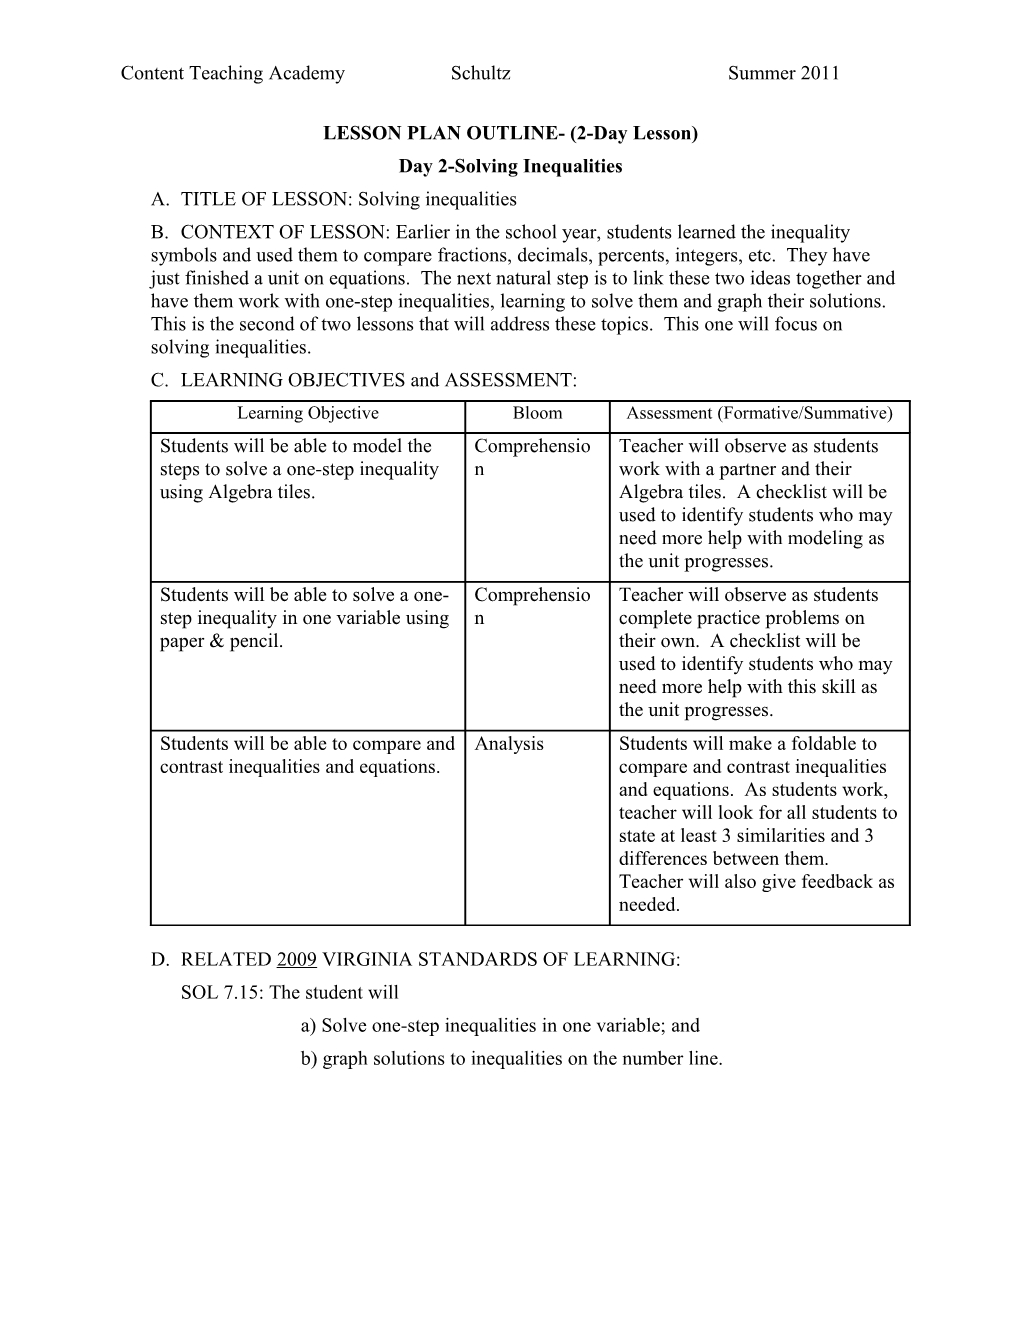 LESSON PLAN OUTLINE- (2-Day Lesson)